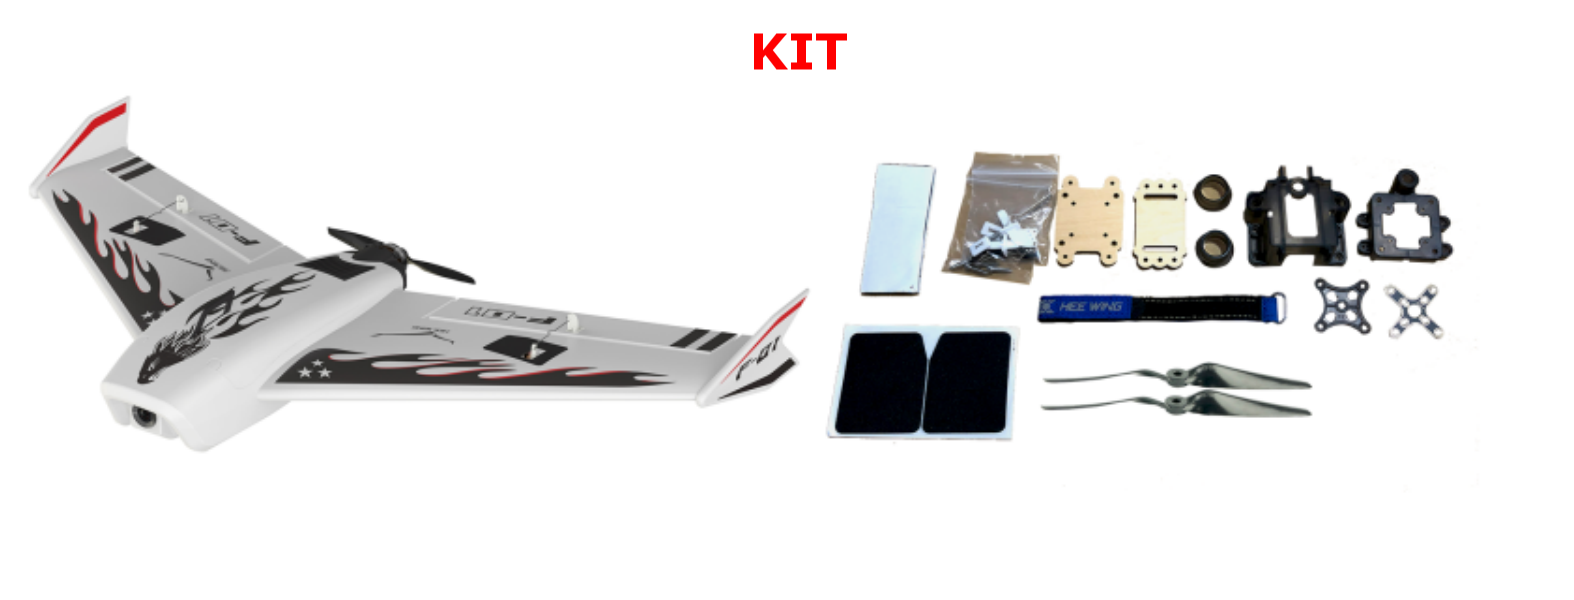 HEE-Wing-F-01-Ultra-Delta-Wing-690mm-Wingspan-EPP-FPV-RC-Airplane-Tailored-for-DJI-Digital-Air-Unit--1876561-14